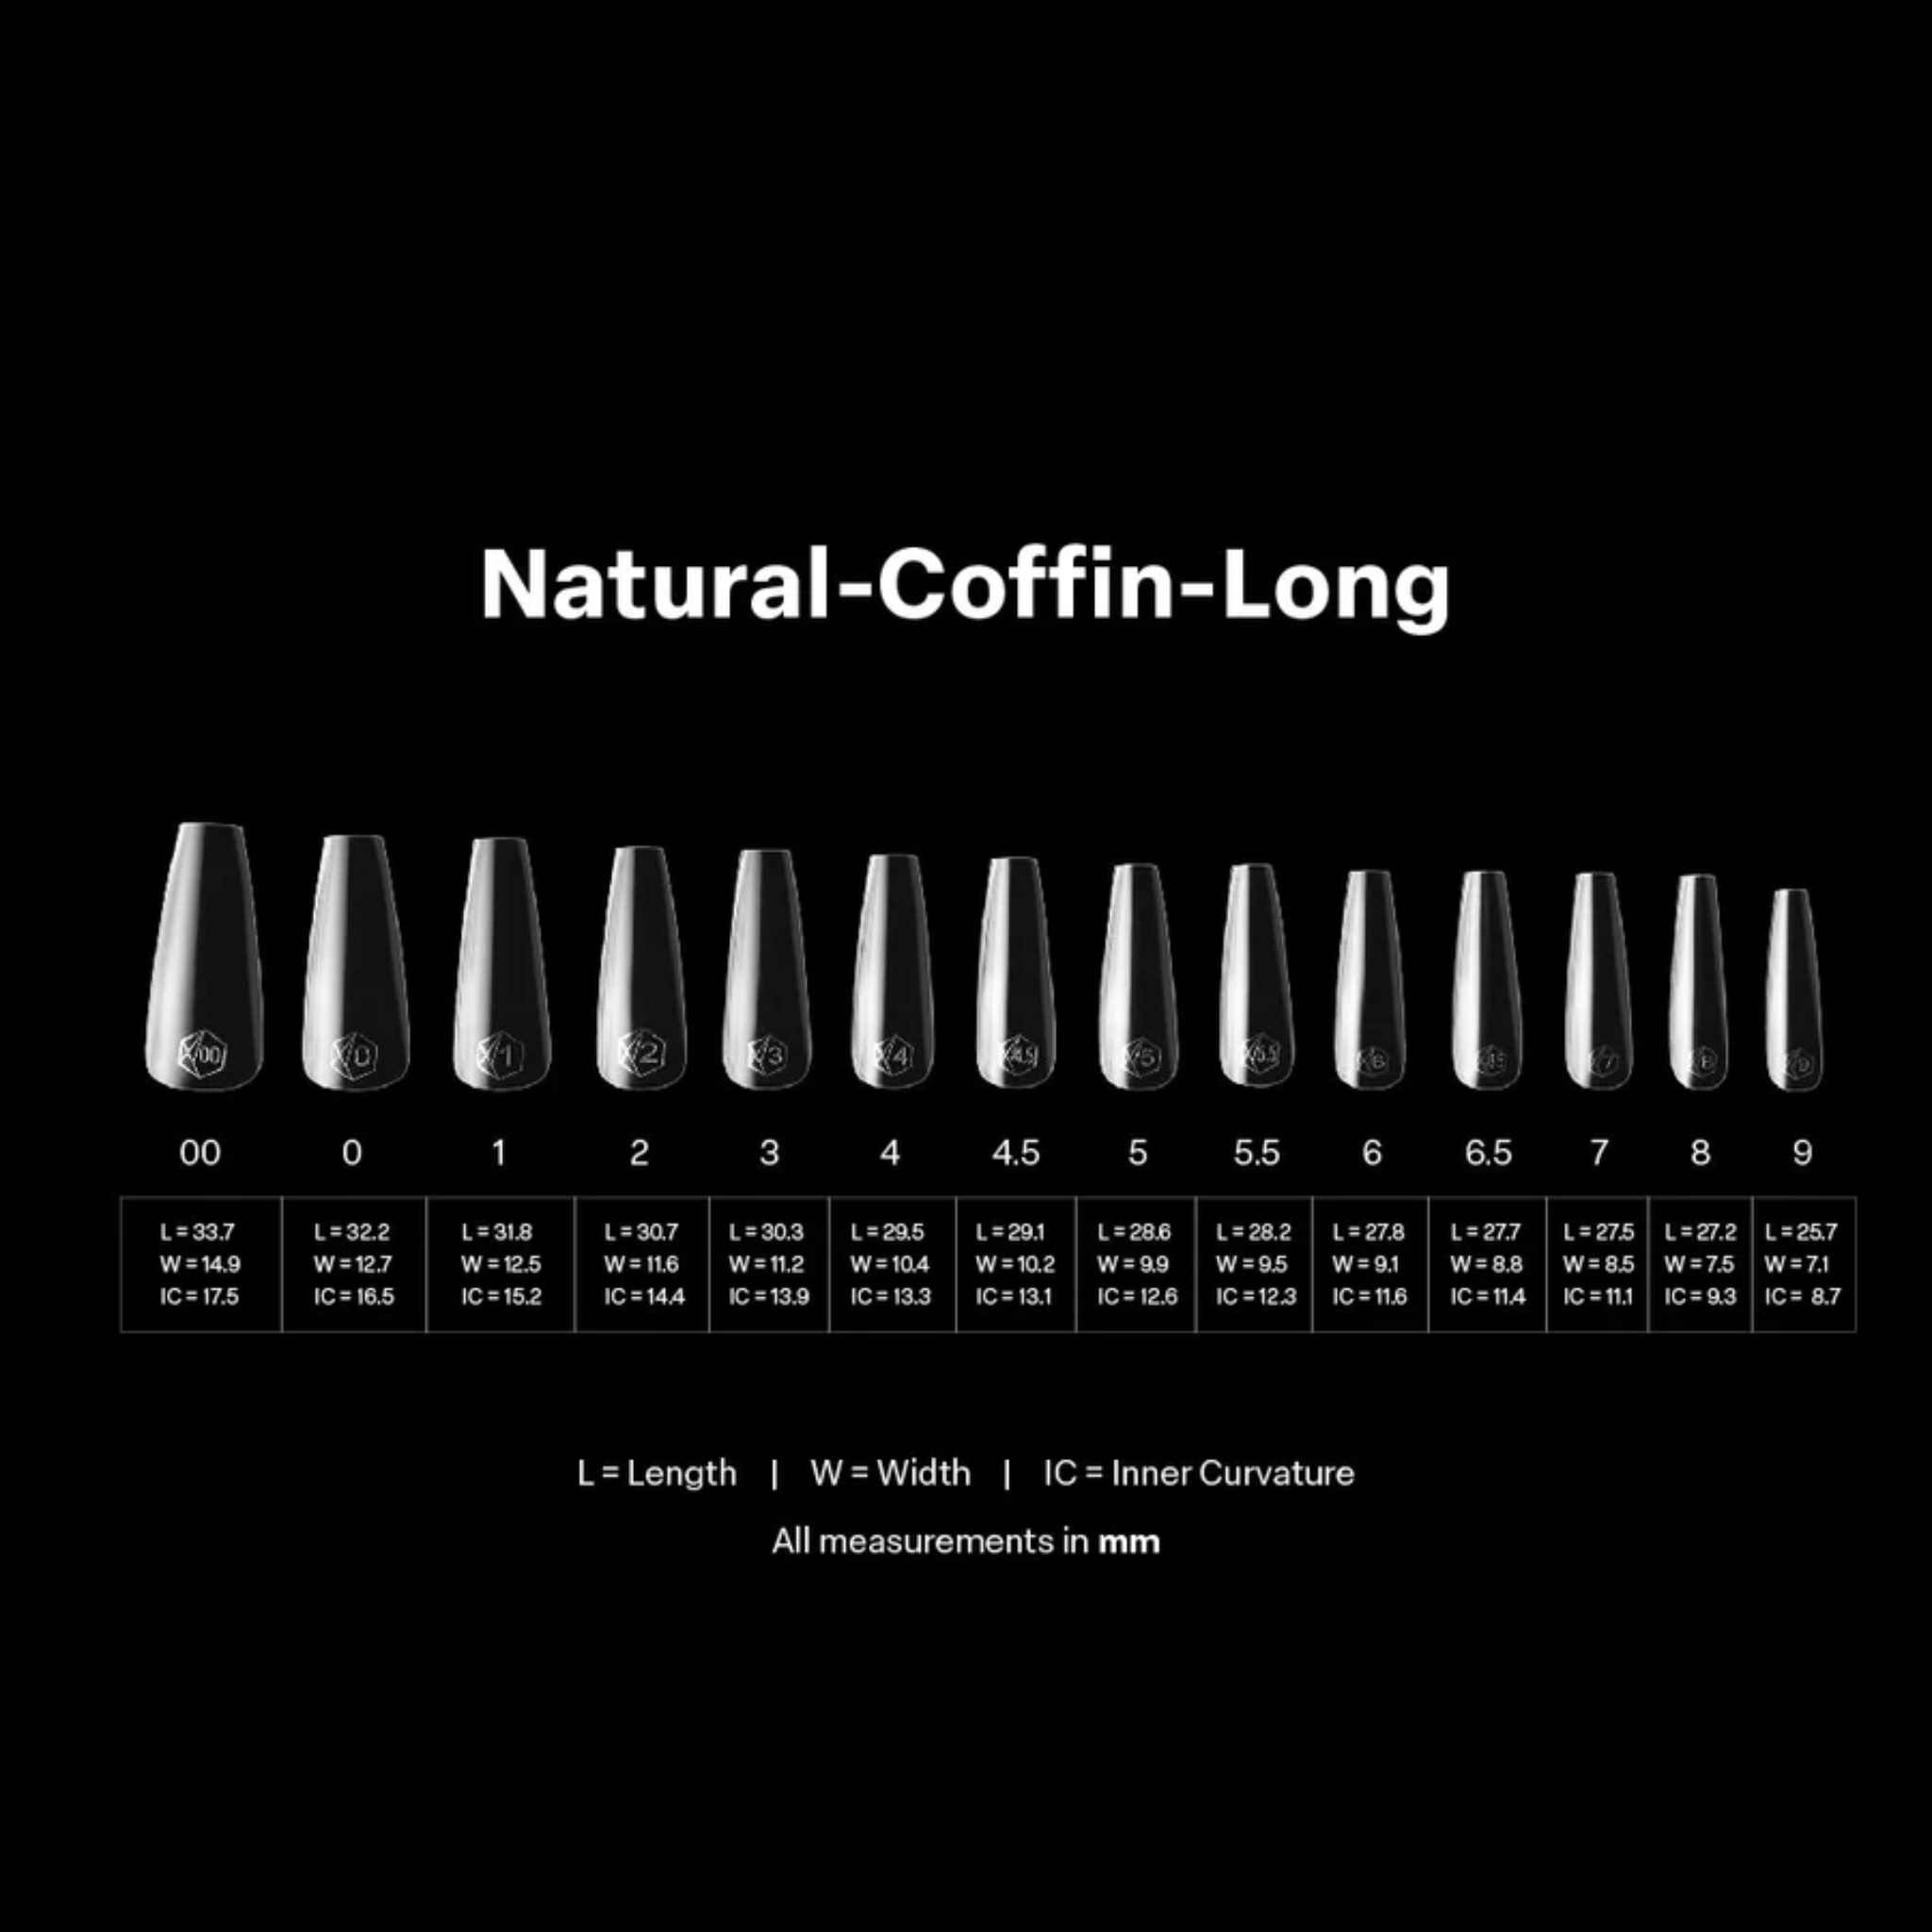 Gel X 2.0 Box of Tips: Natural Coffin - Long (14 Sizes)